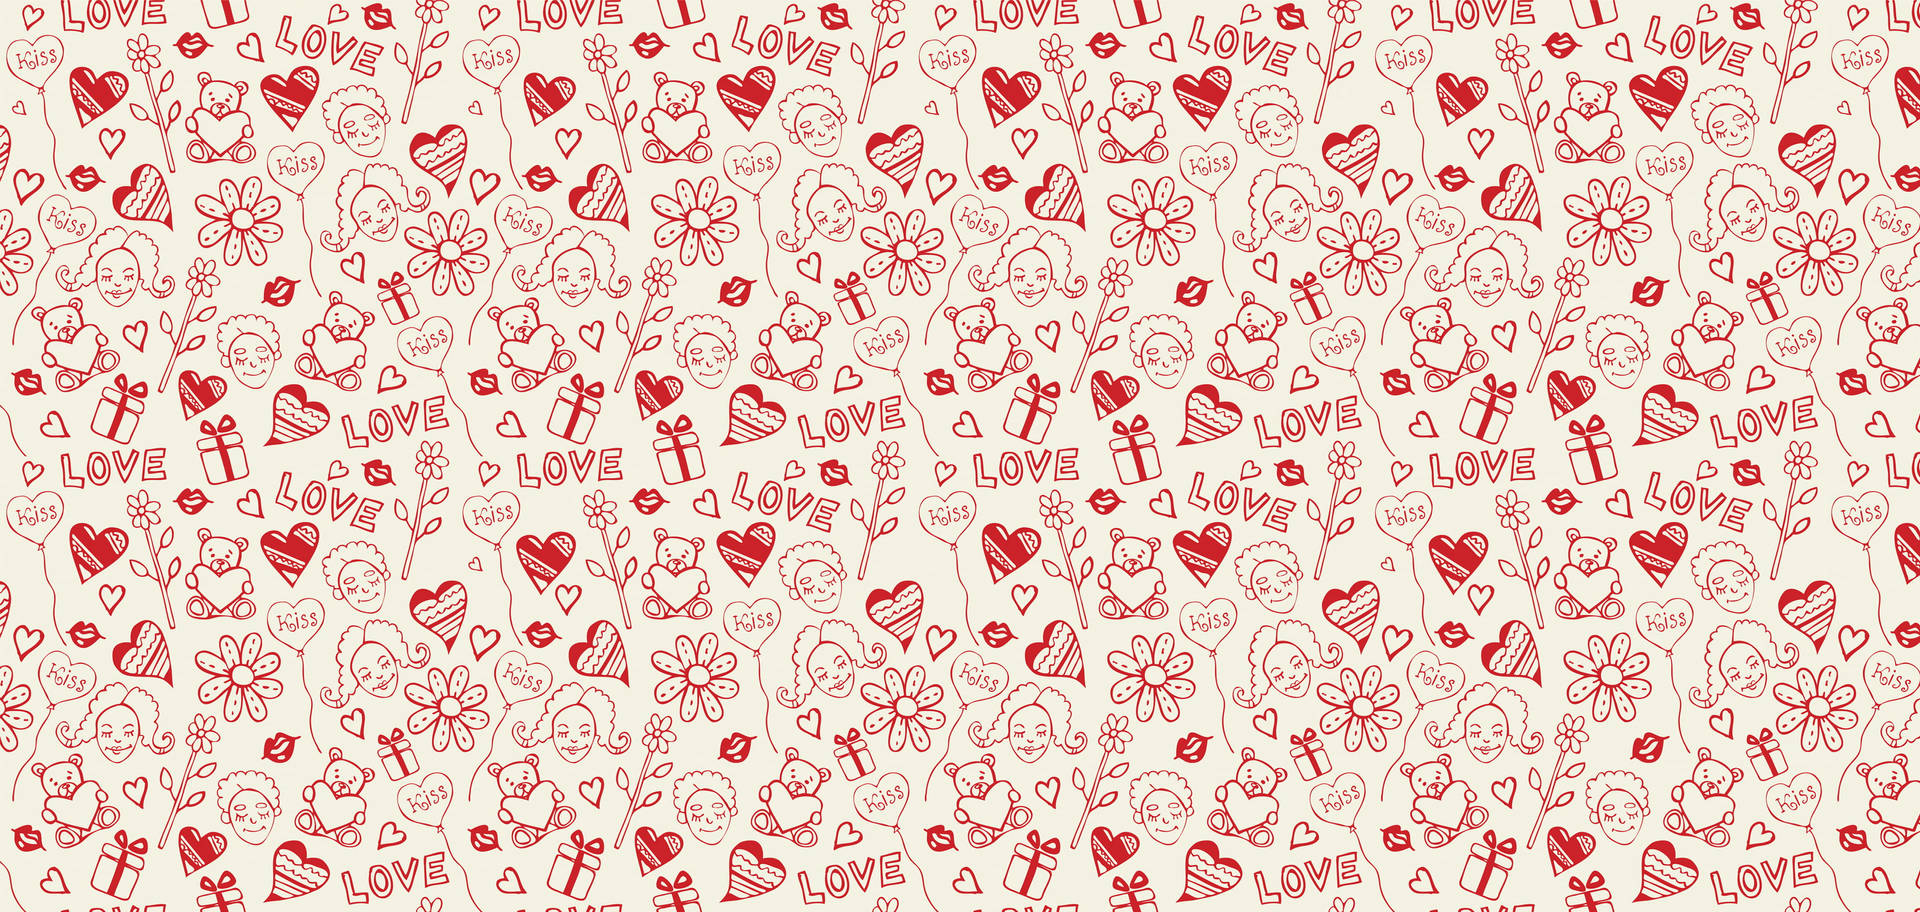 Awesome Heart Doodle Background